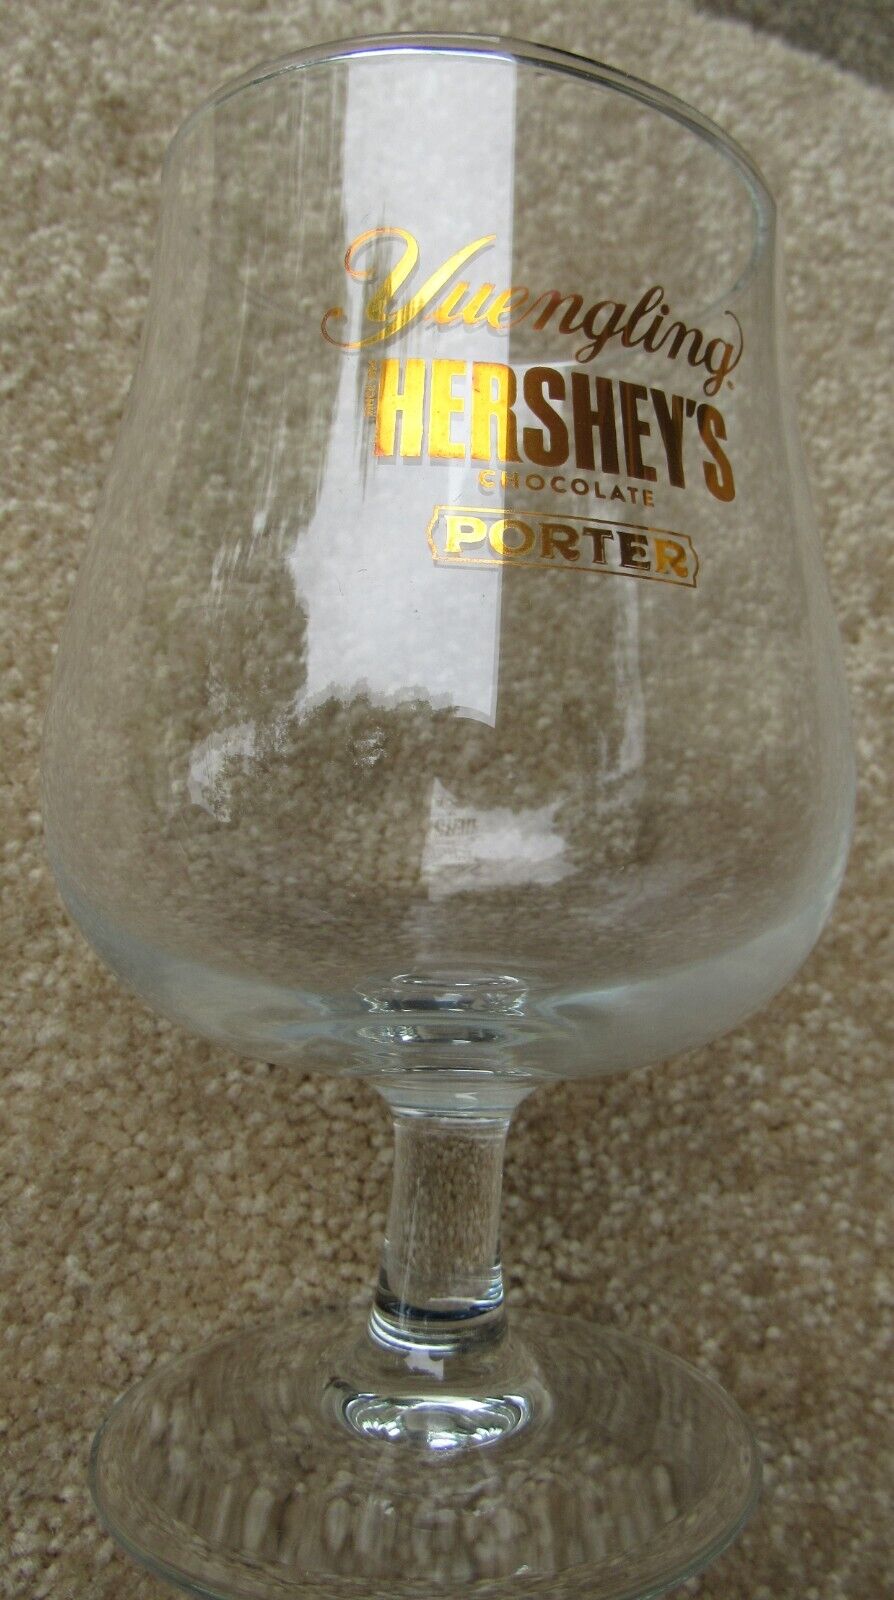 Yuengling Hershey's Chocolate Porter Beer Stem Glass Brand NEW More Available